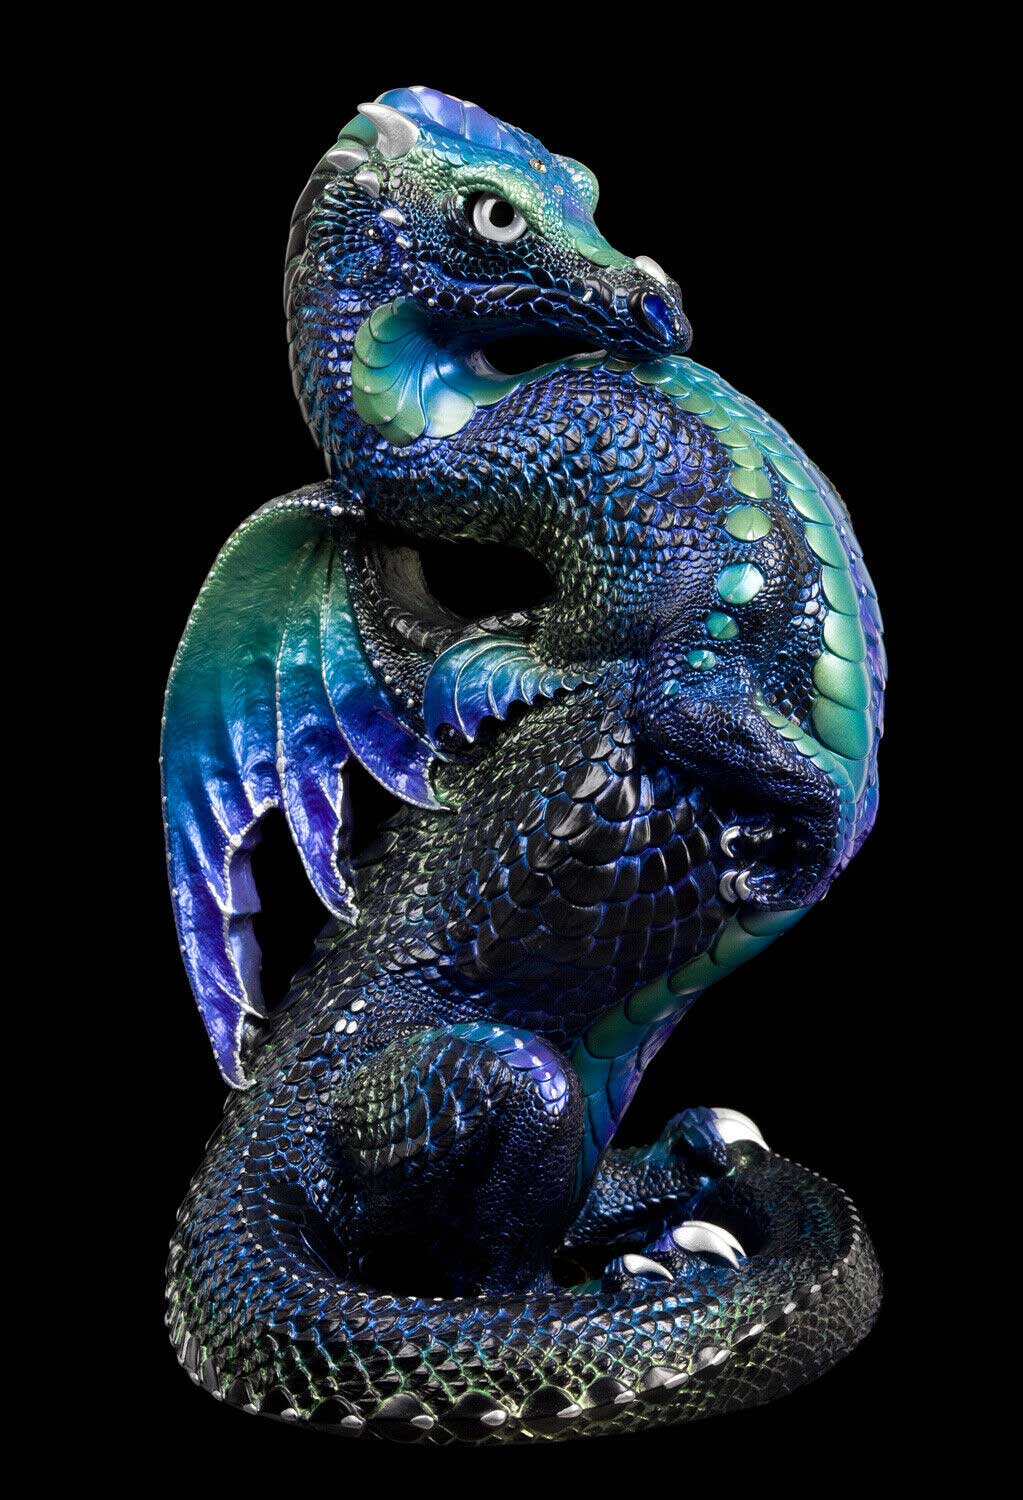 20220204-Onyx-Moonstone-Emperor-Dragon-Test-Paint-1-by-Gina